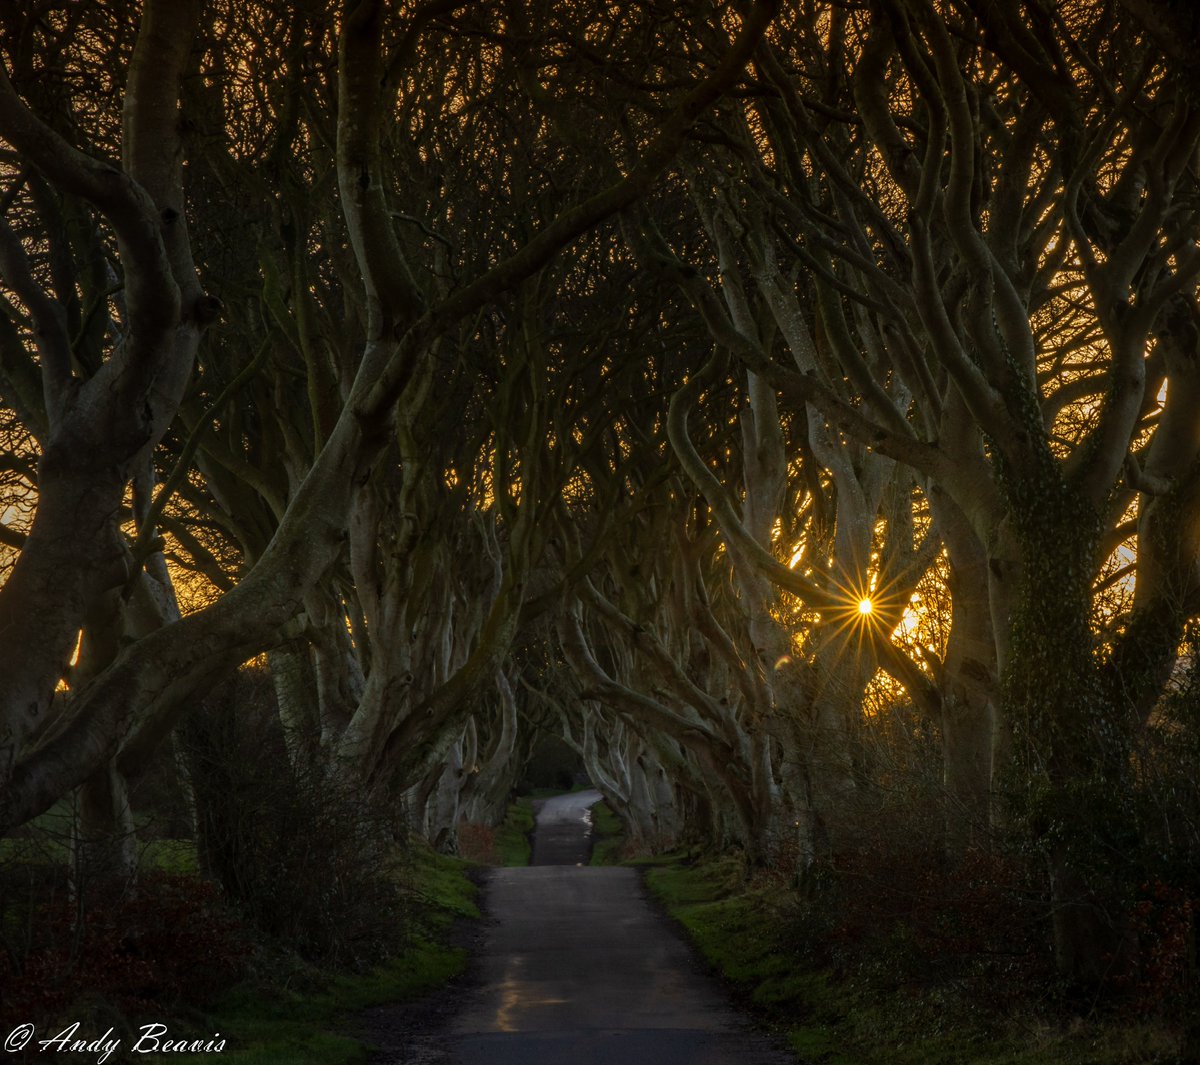 Starting 2024 off with a return early morning vidit to #DarkHedges #NorthernIreland #Sunrise